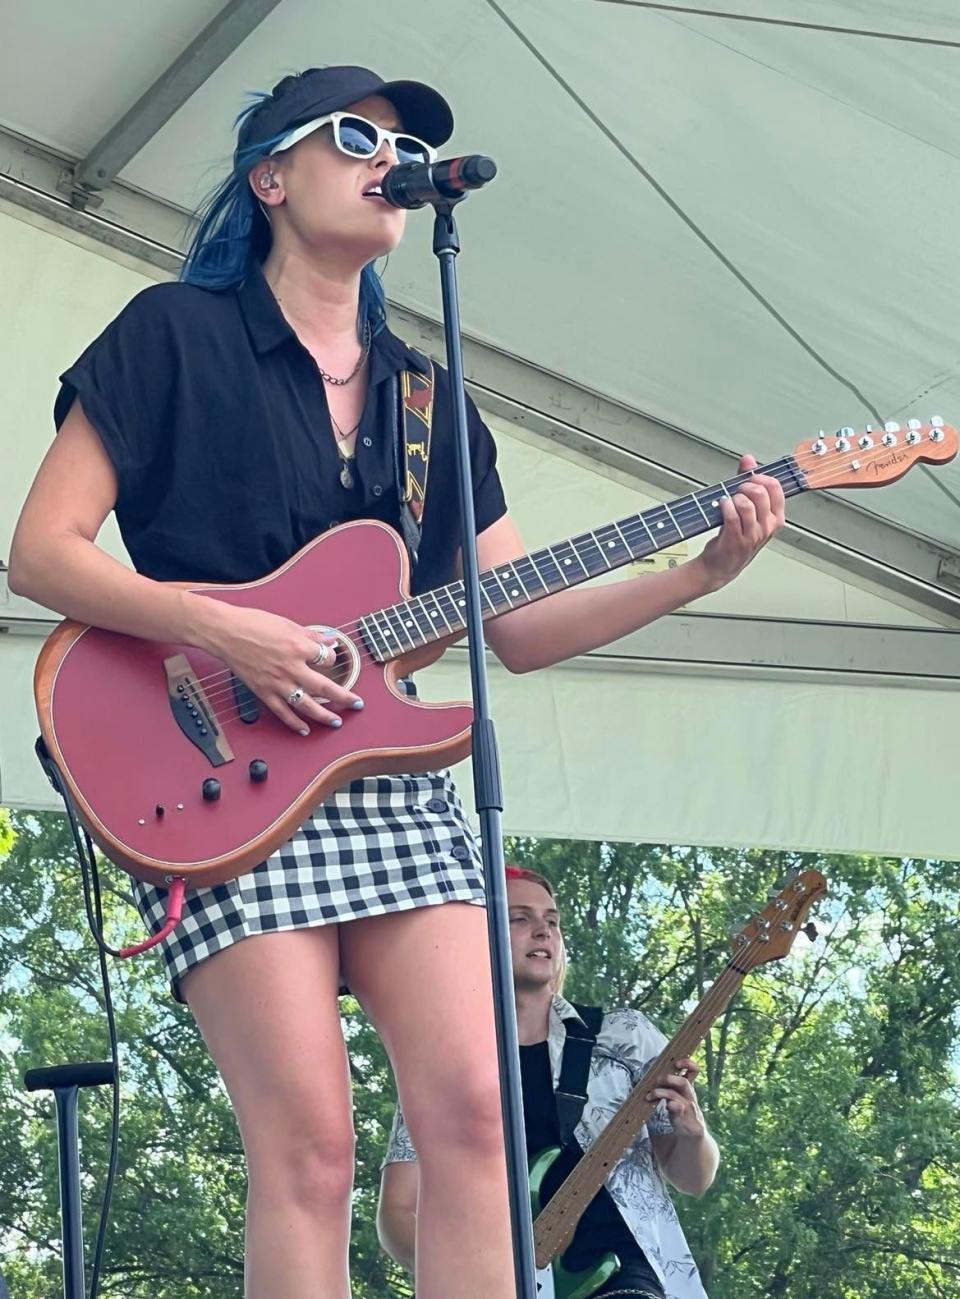 Jackie Popovec, lead singer for The Vindys, is shown performing at the Firestone Country Club earlier this month during the Bridgestone Senior Open Championship.